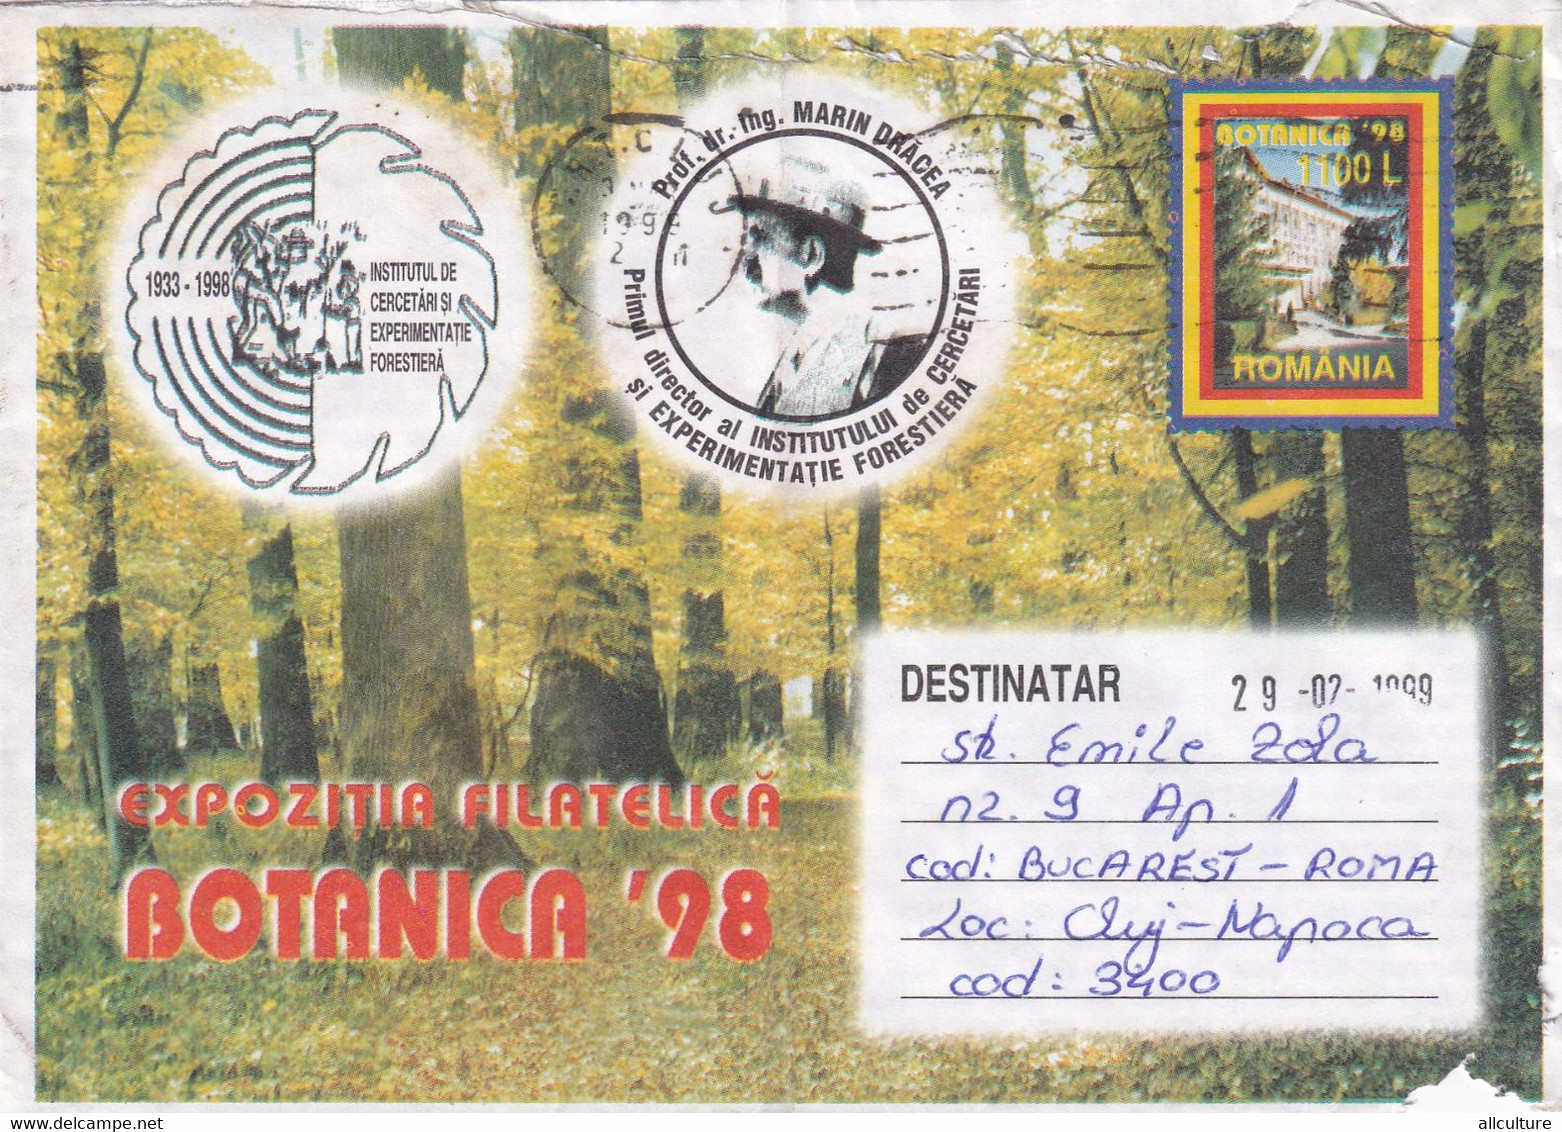 A9636- PHYLATELIC EXHIBITION BOTANICA '98 ROMANIA COVER STATIONERY, FOREST RESEARCH AND EXPERIMENTATION INSTITUTE 1999 - Storia Postale